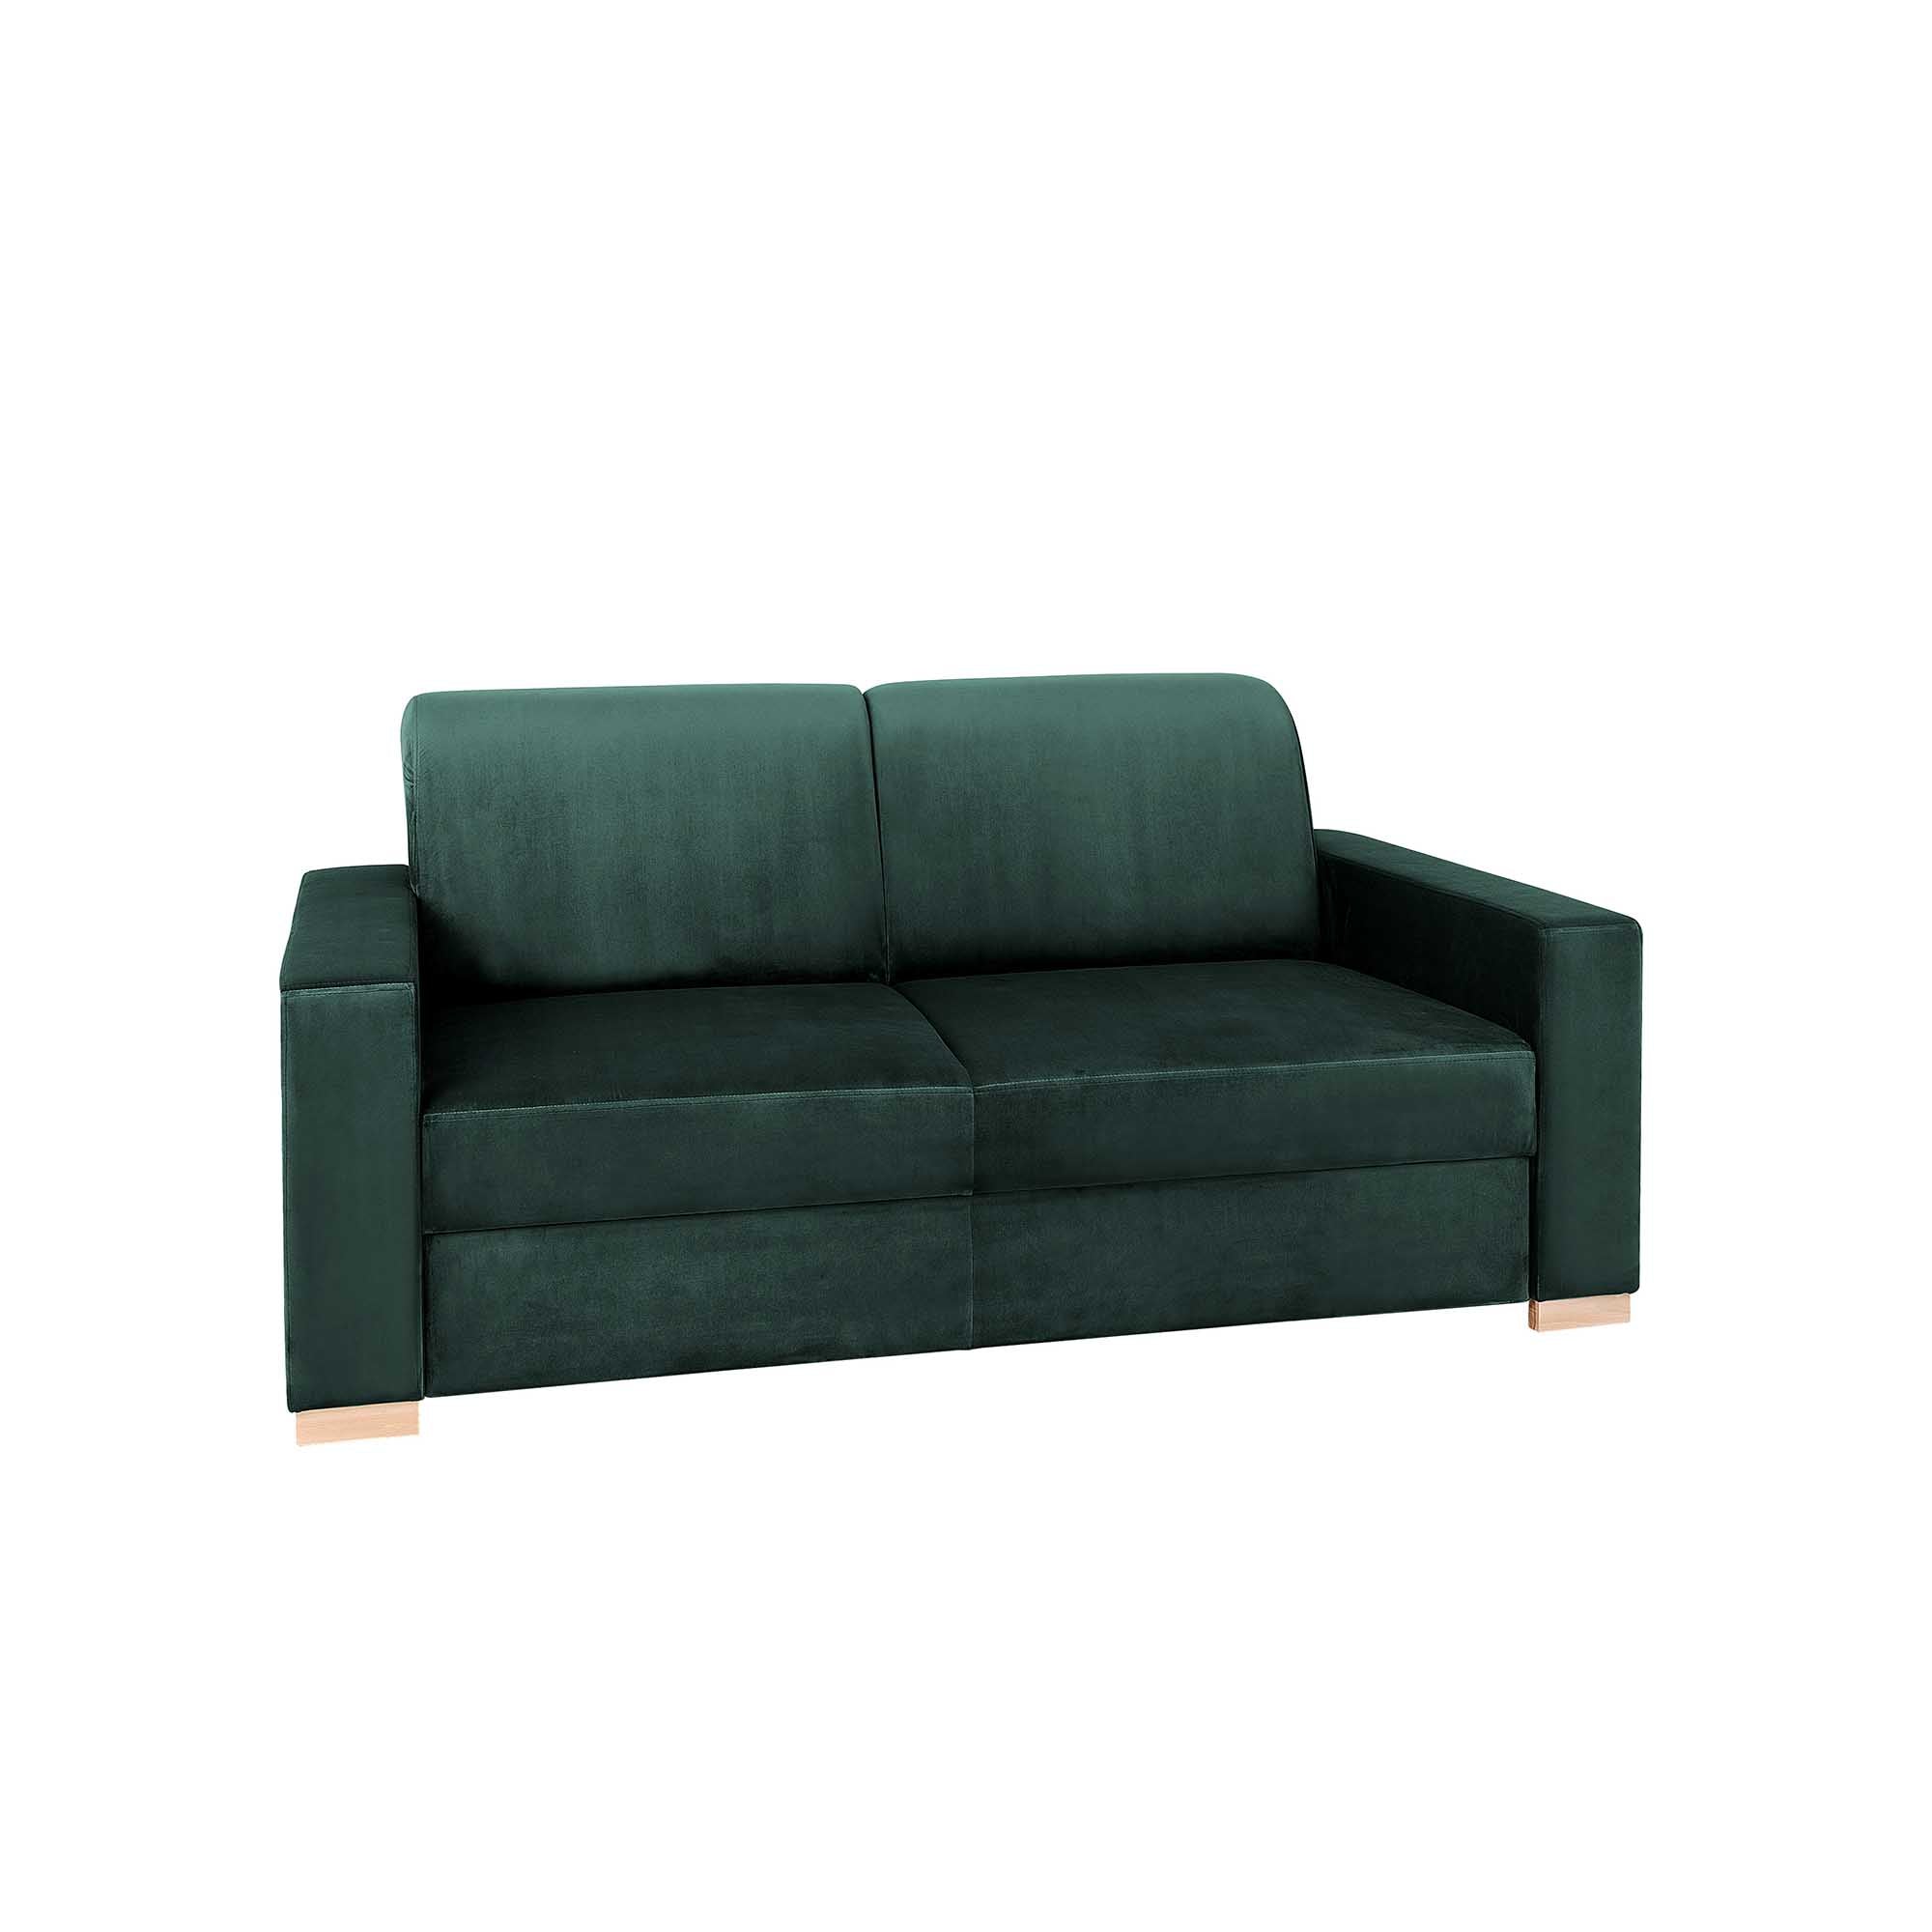 STABLE Sofa 2 Seaters upholstery colour avocado